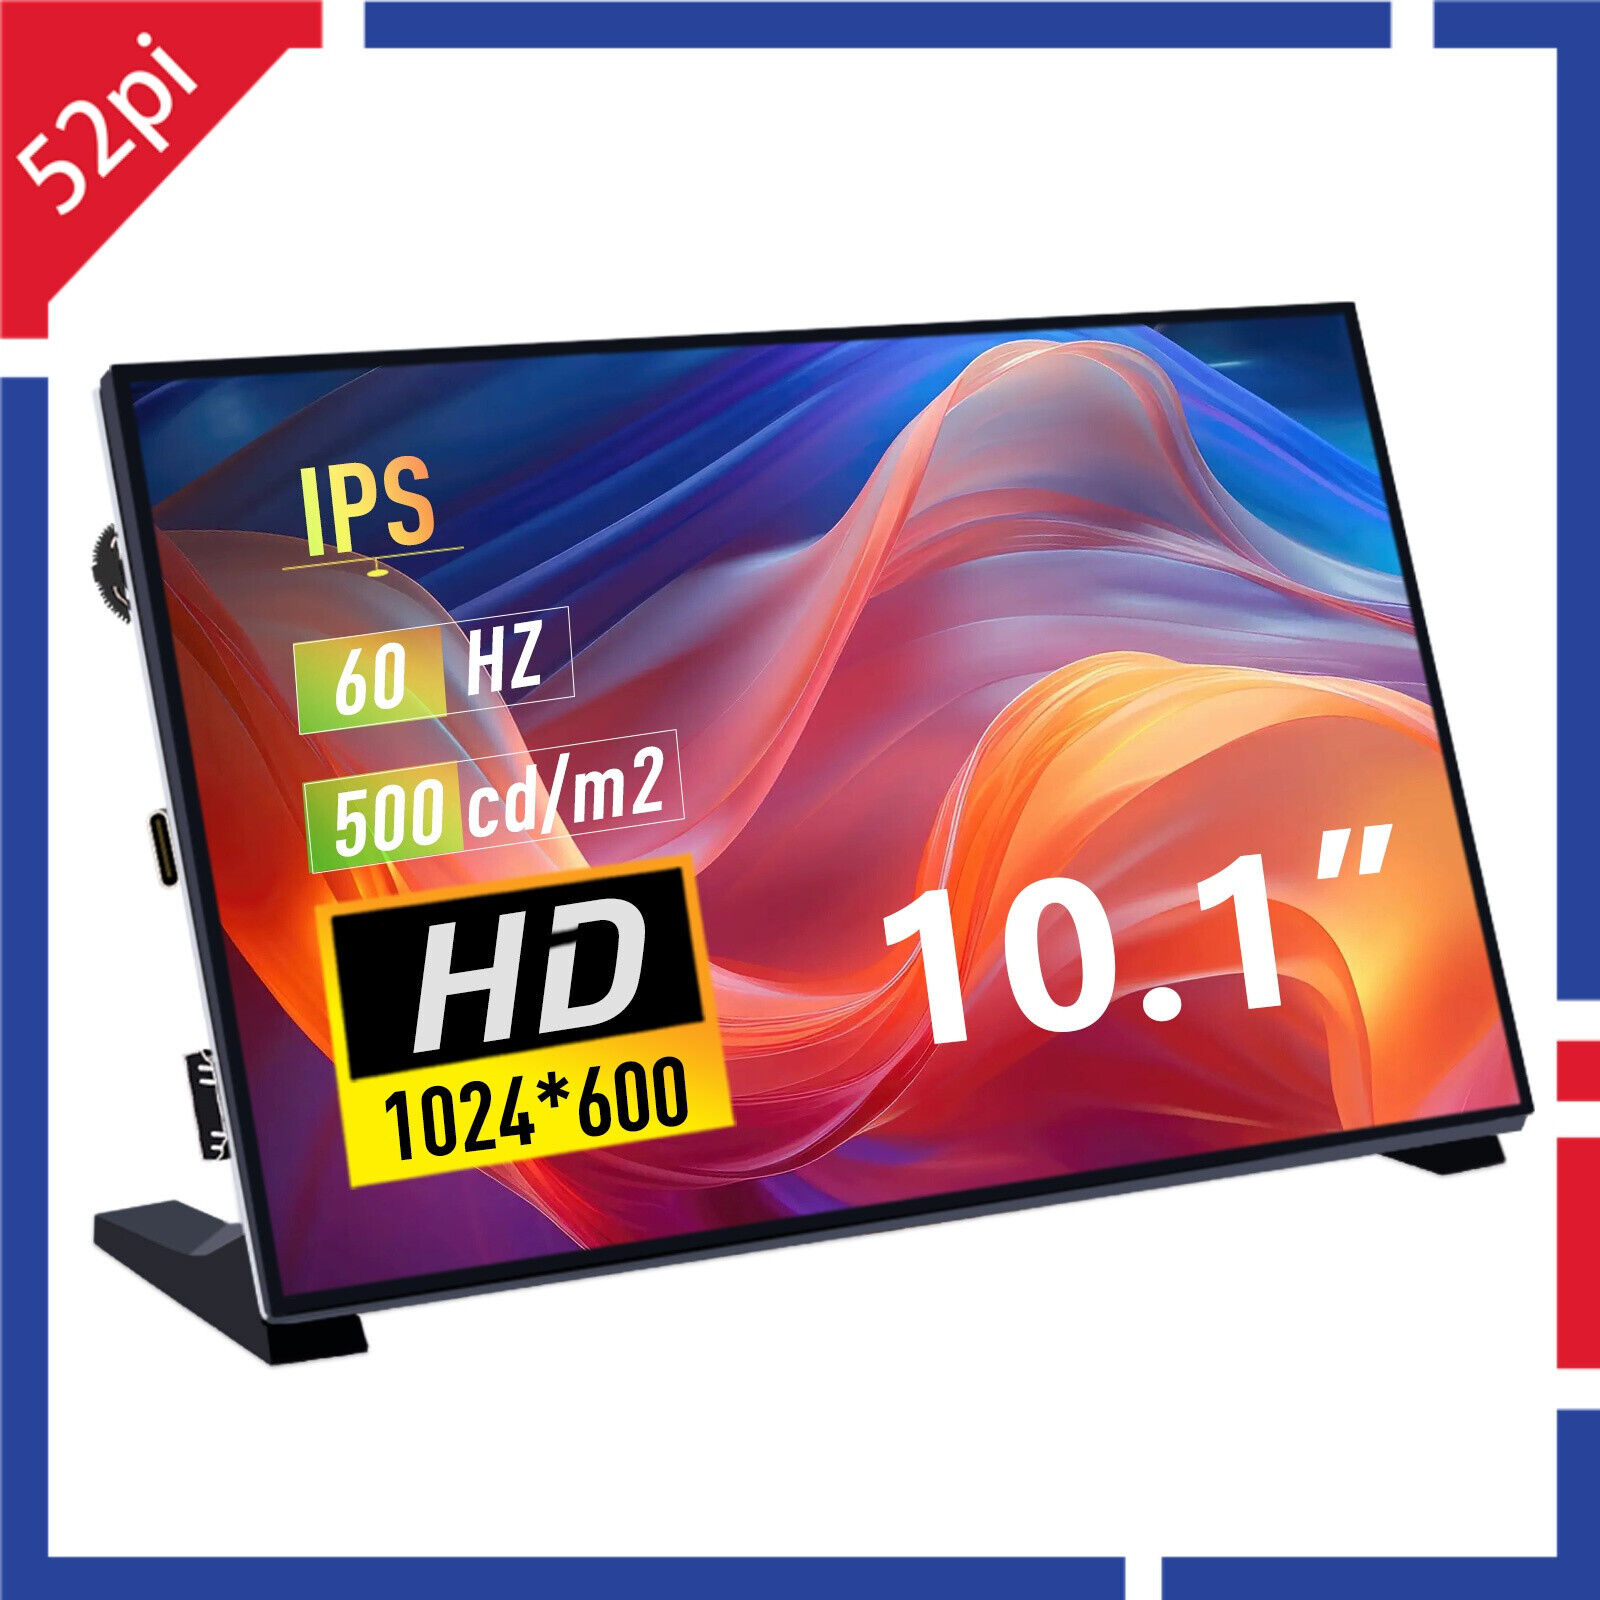 10.1 inch 1024*600 Display IPS Screen with Brackets for Raspberry/PC (No Touch)